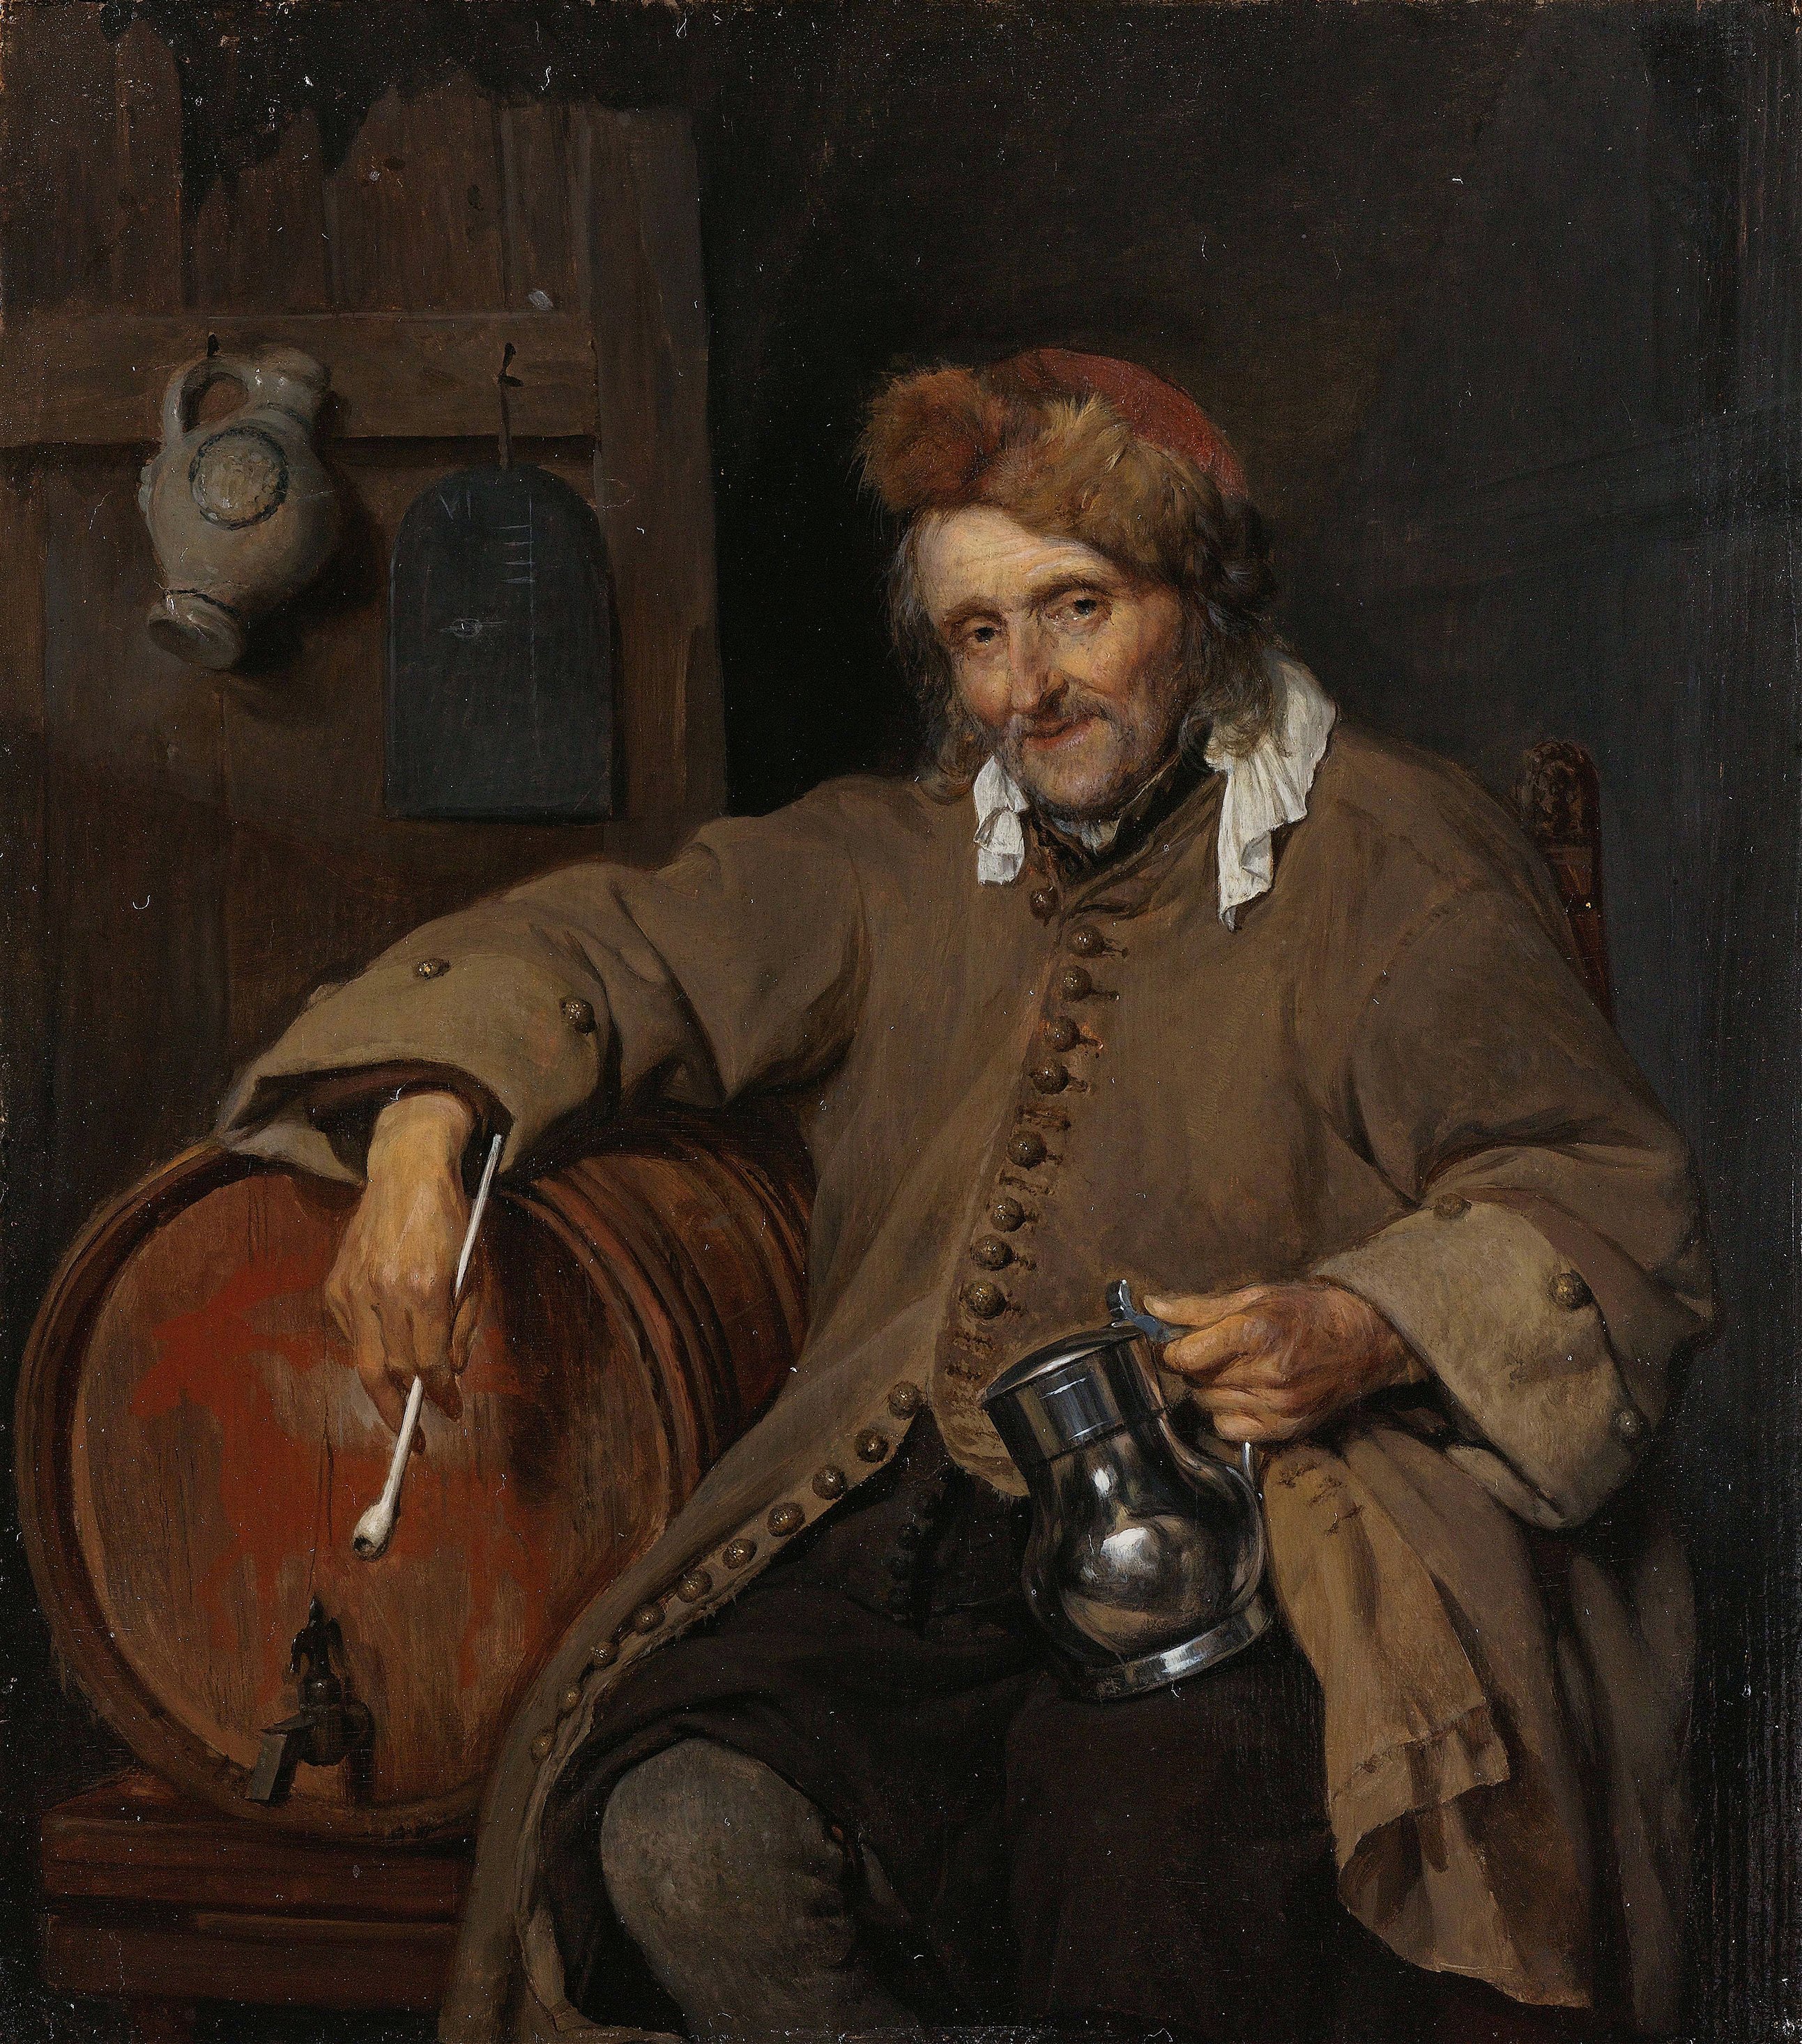 The Old Drinker (c. 1661 - c. 1663)